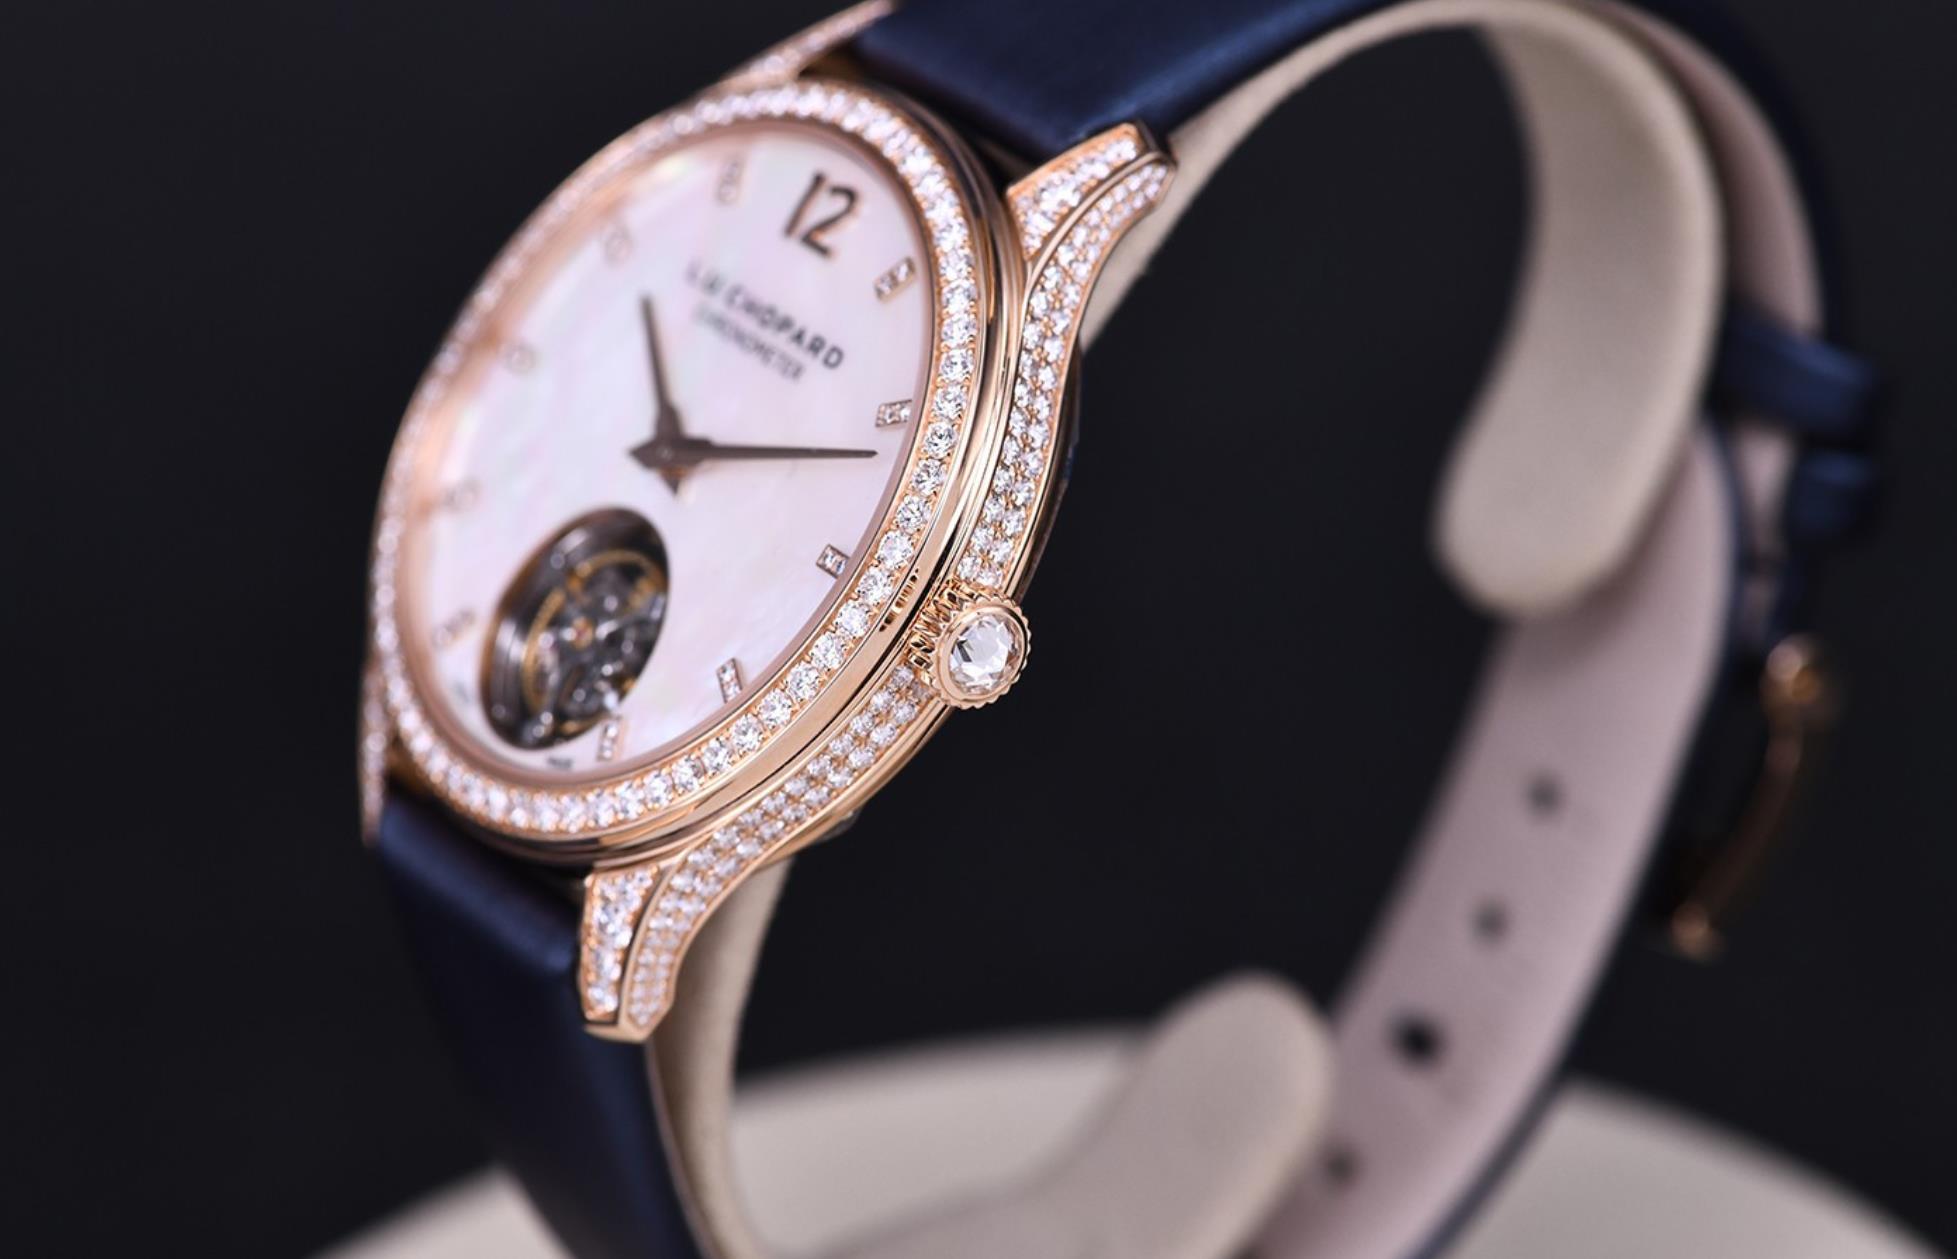 The 18k rose gold fake watch is decorated with diamonds.